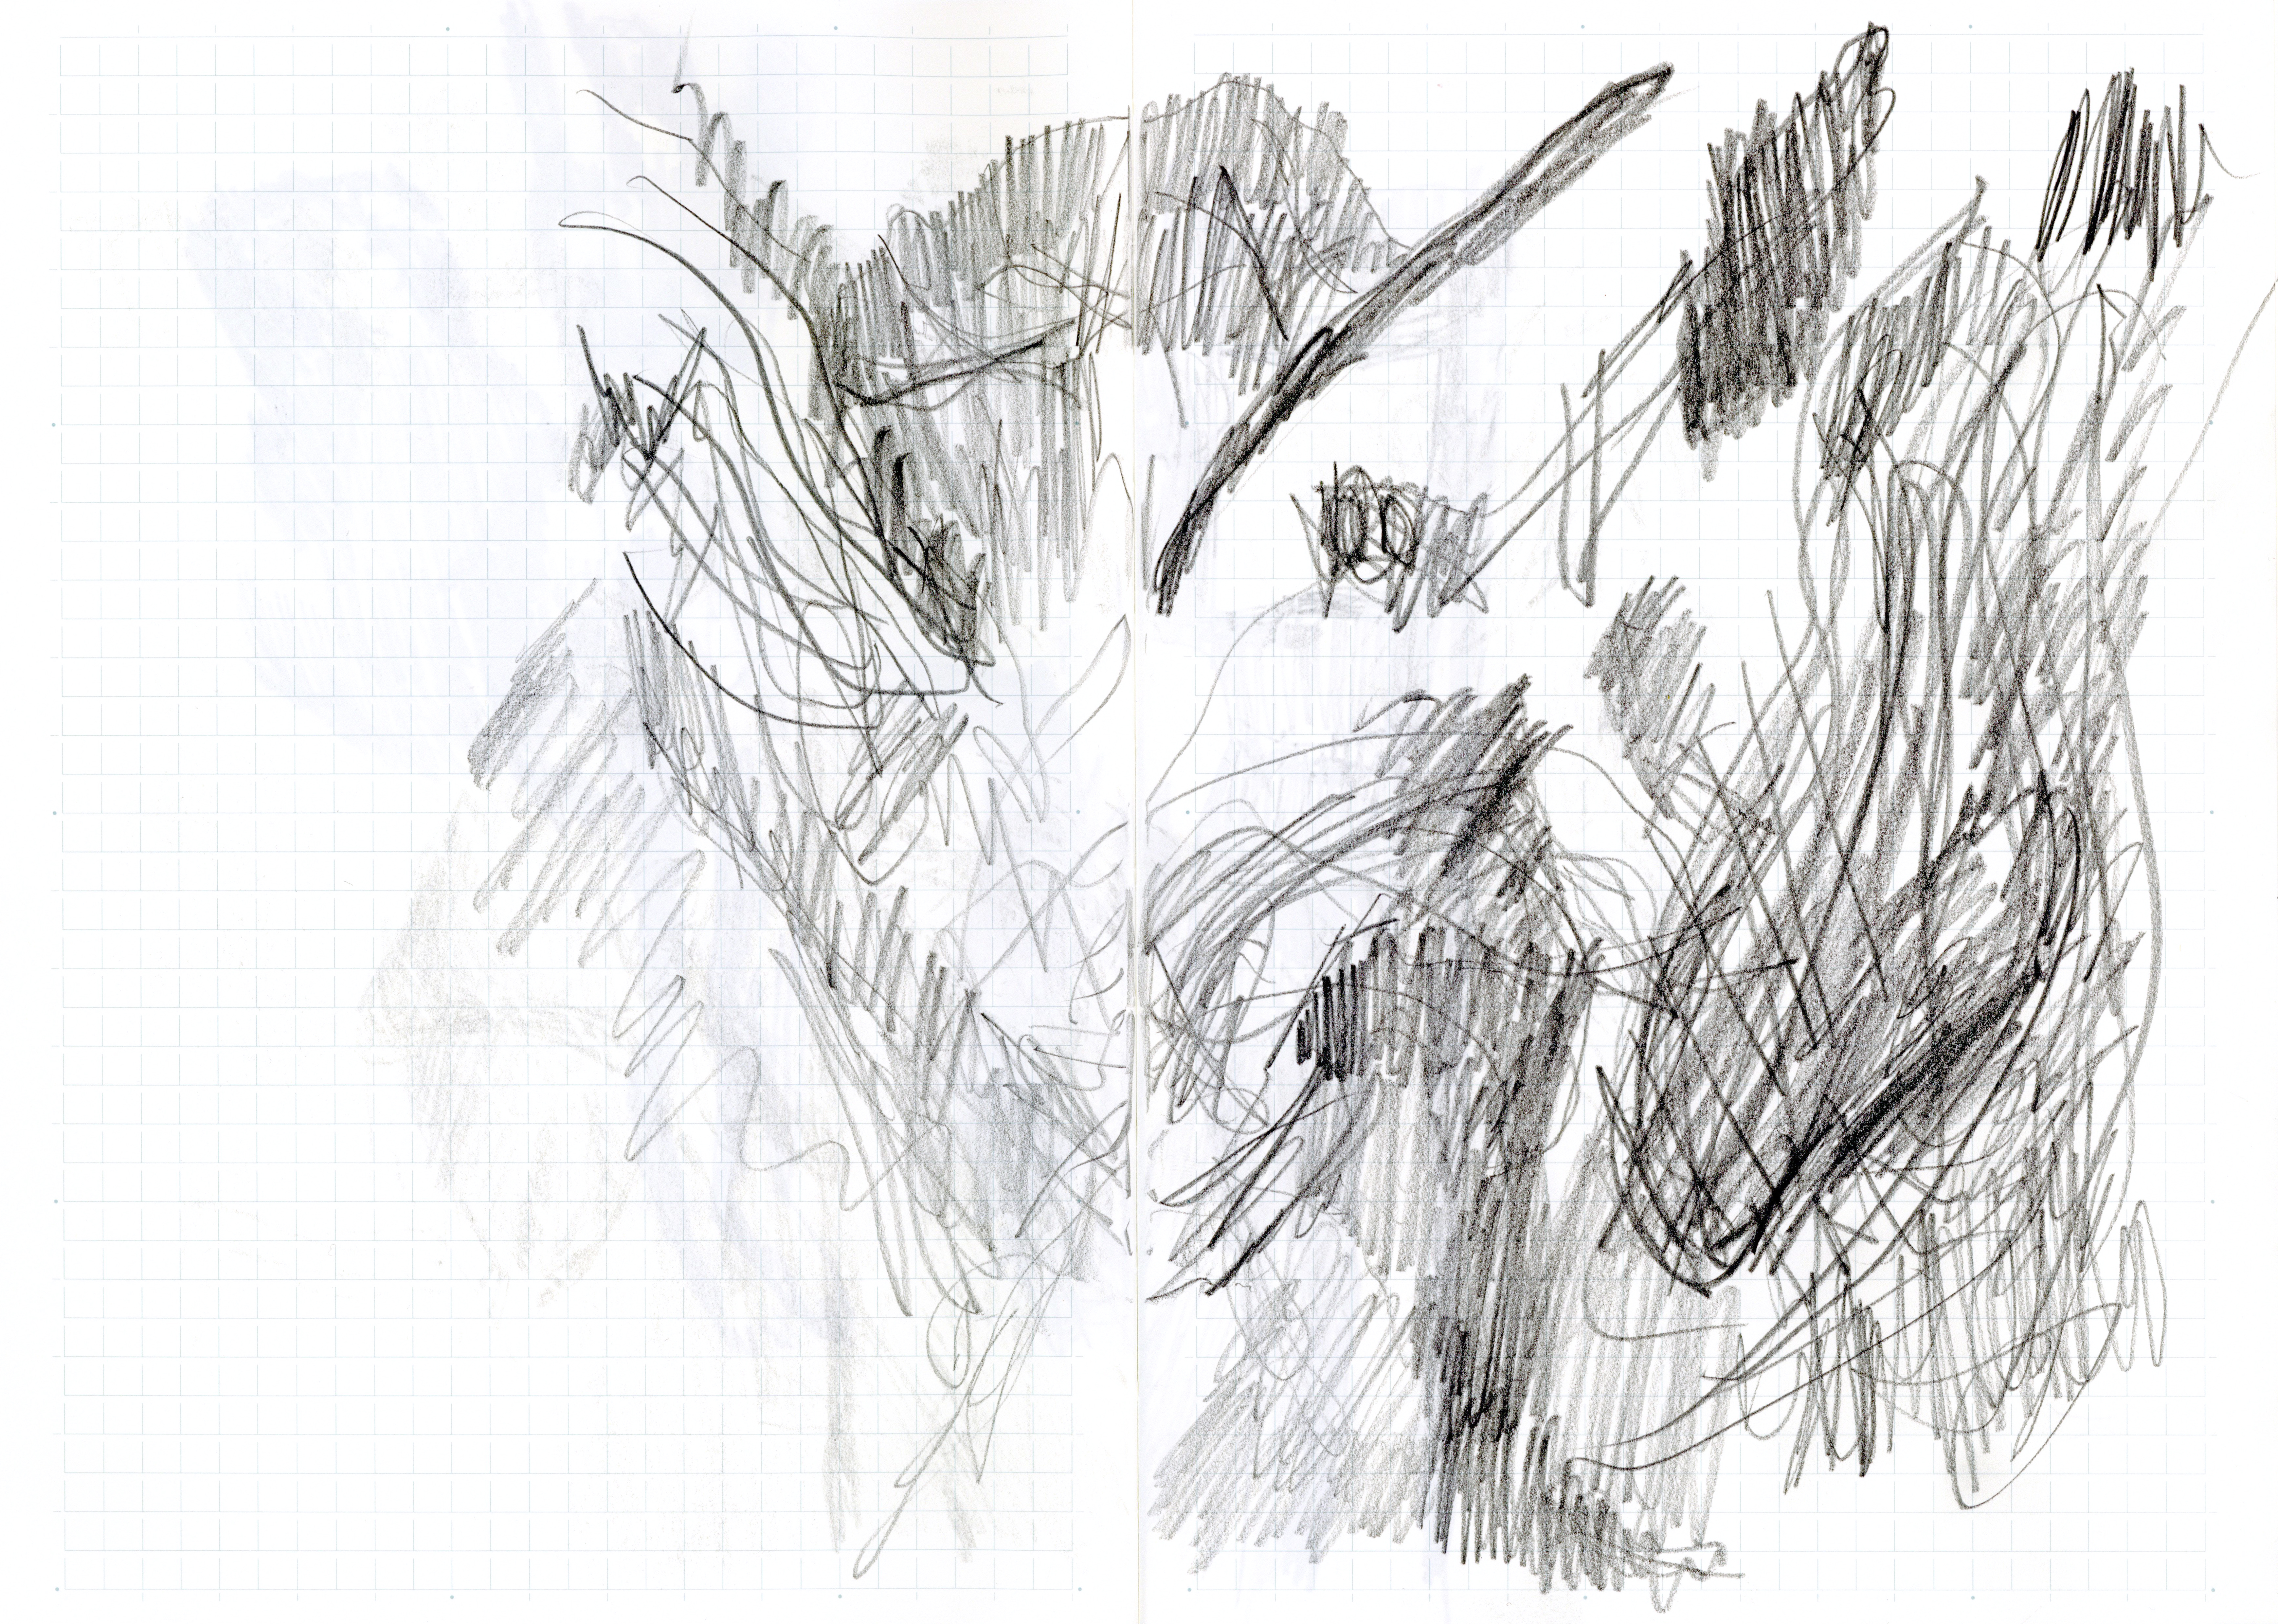 abstract pencil drawing with hatching and overlapping lines